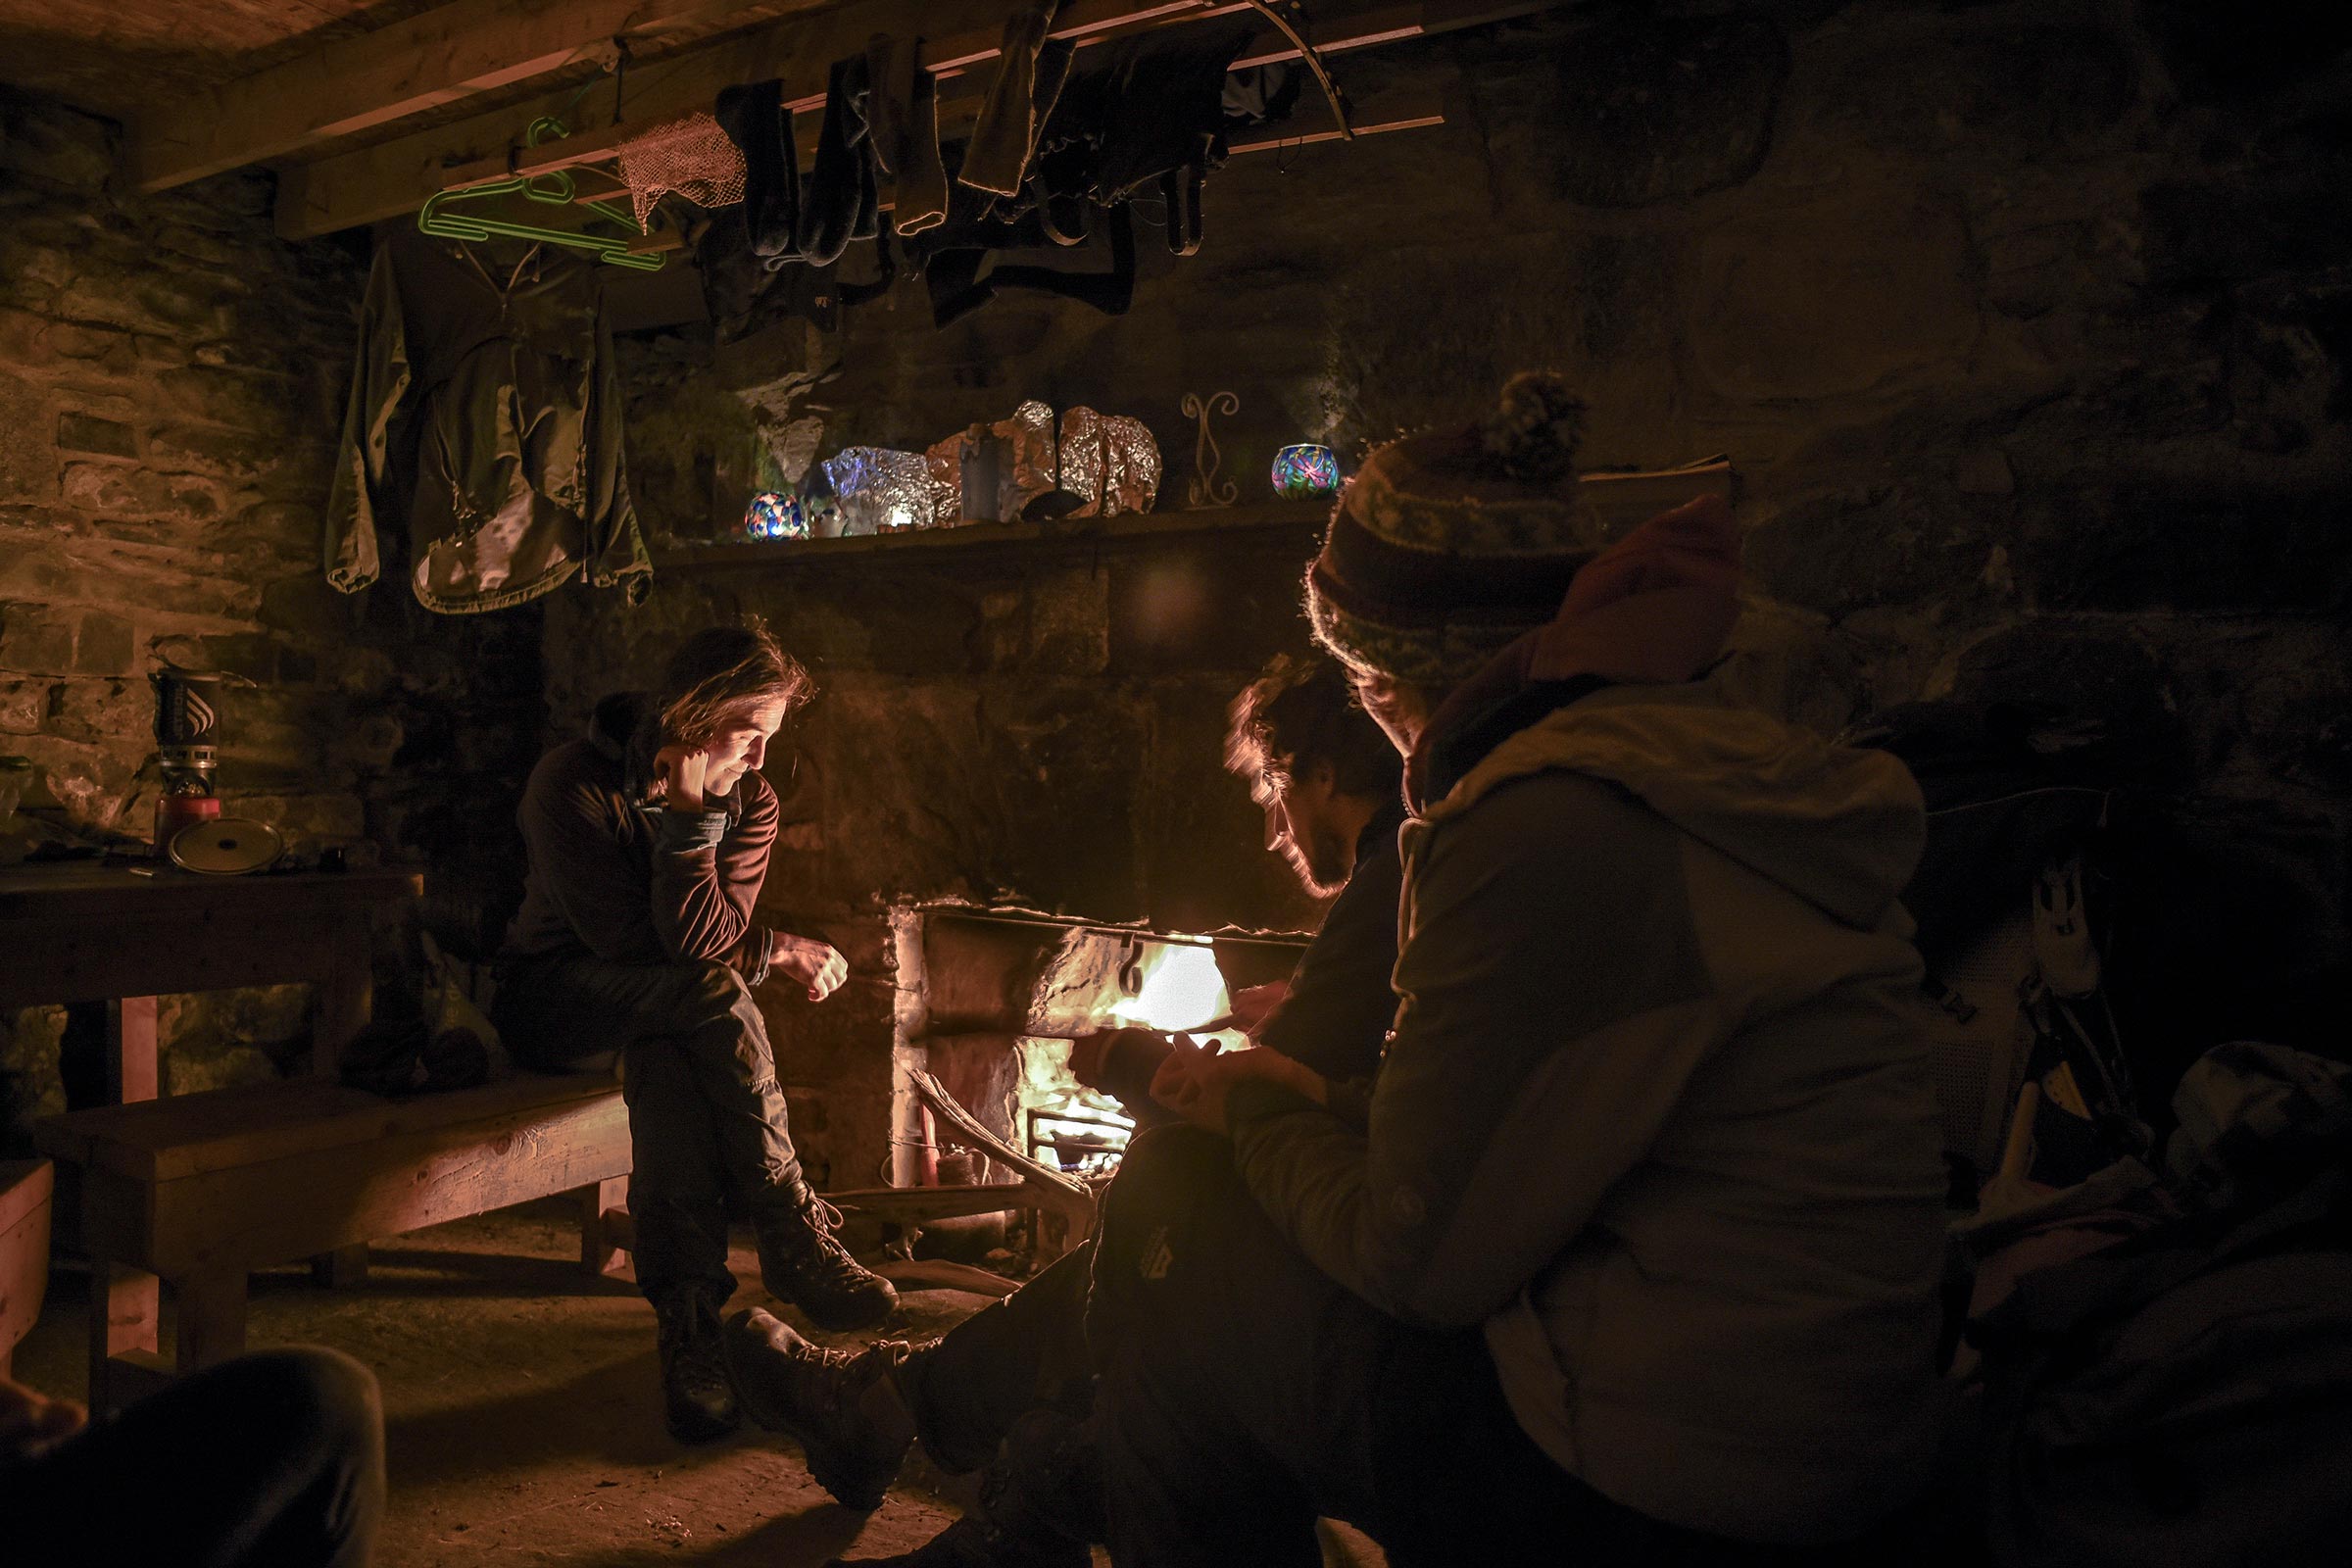 People in a tone building next to a fire place